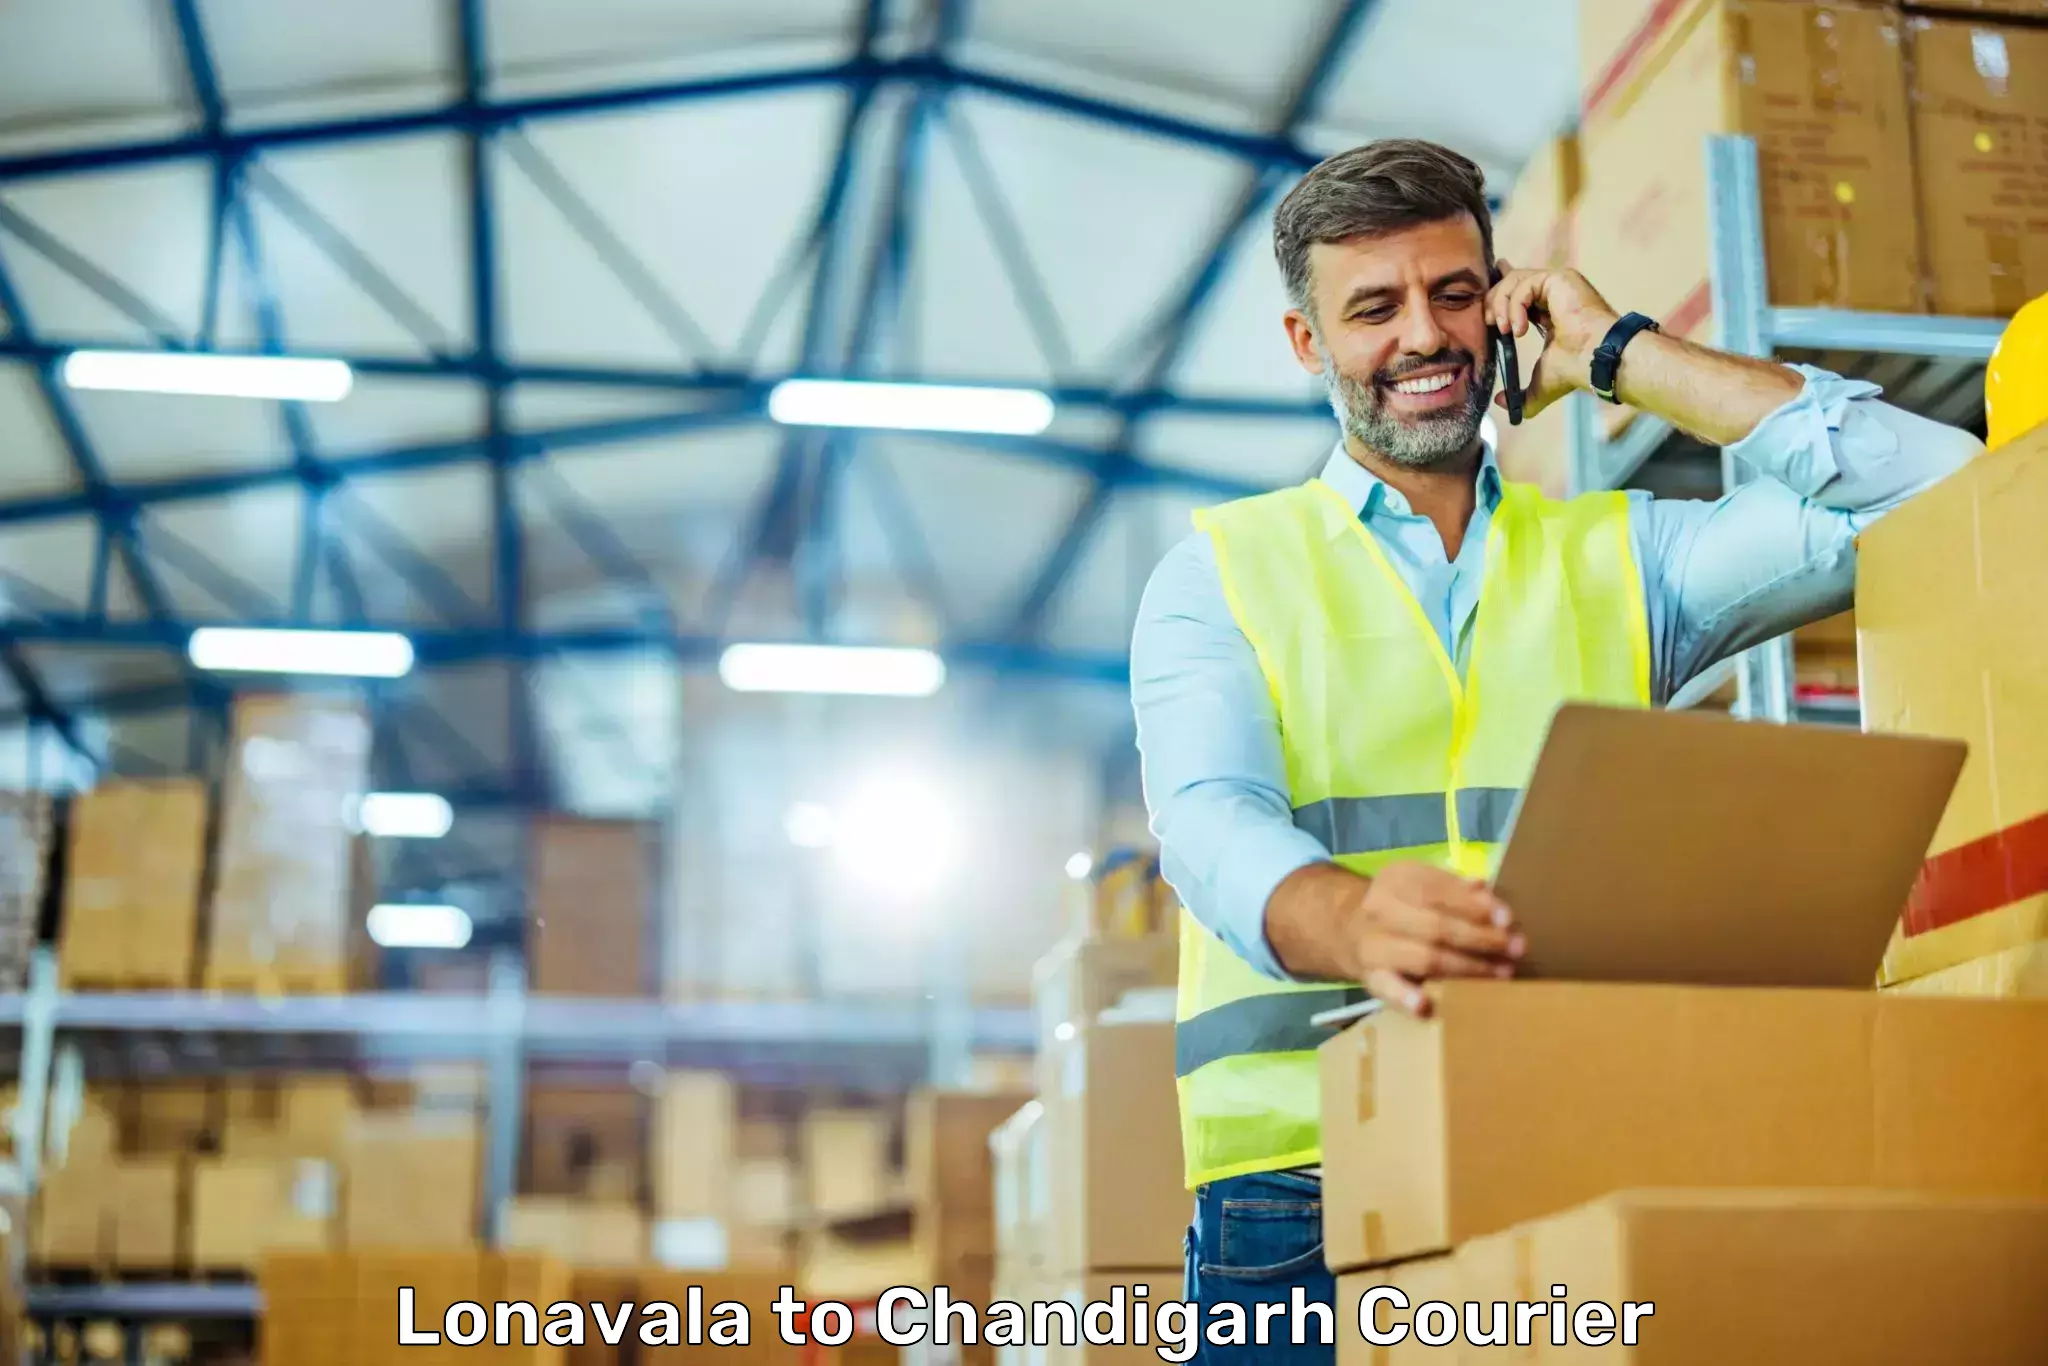 State-of-the-art courier technology Lonavala to Chandigarh